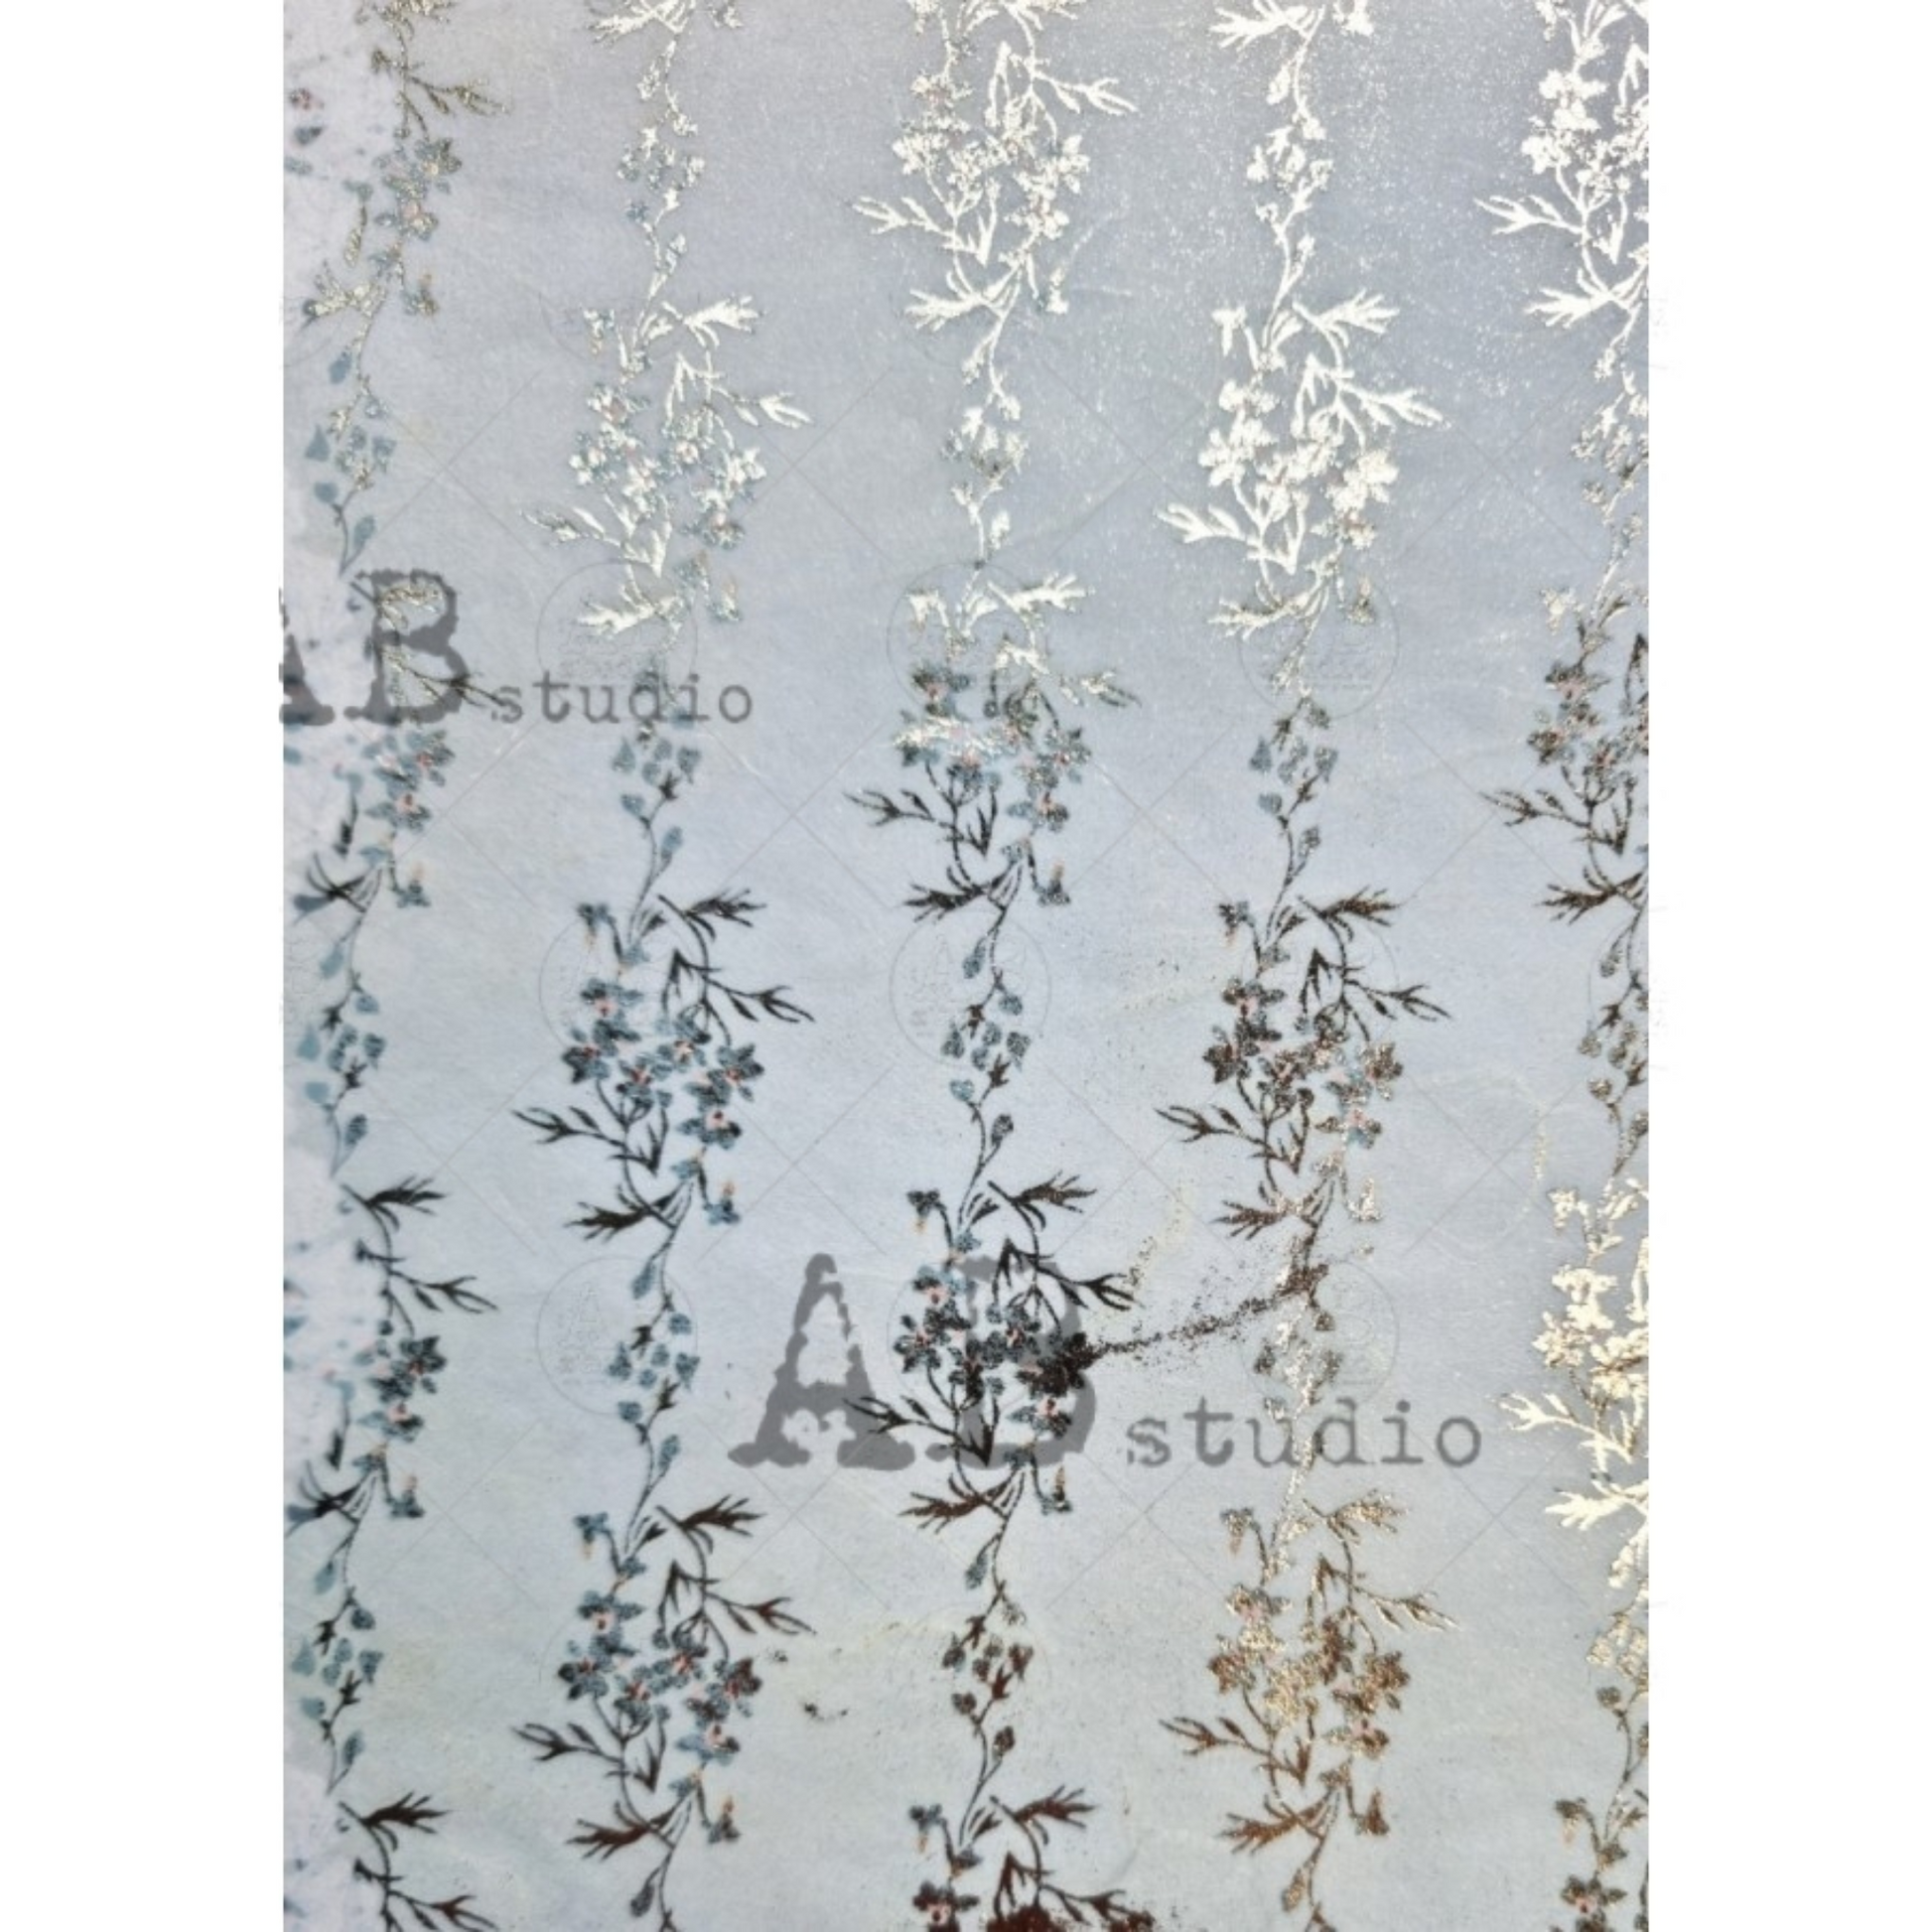 "Gilded Vines" gilded metallic decoupage rice paper by AB Studio available at Milton's Daughter.